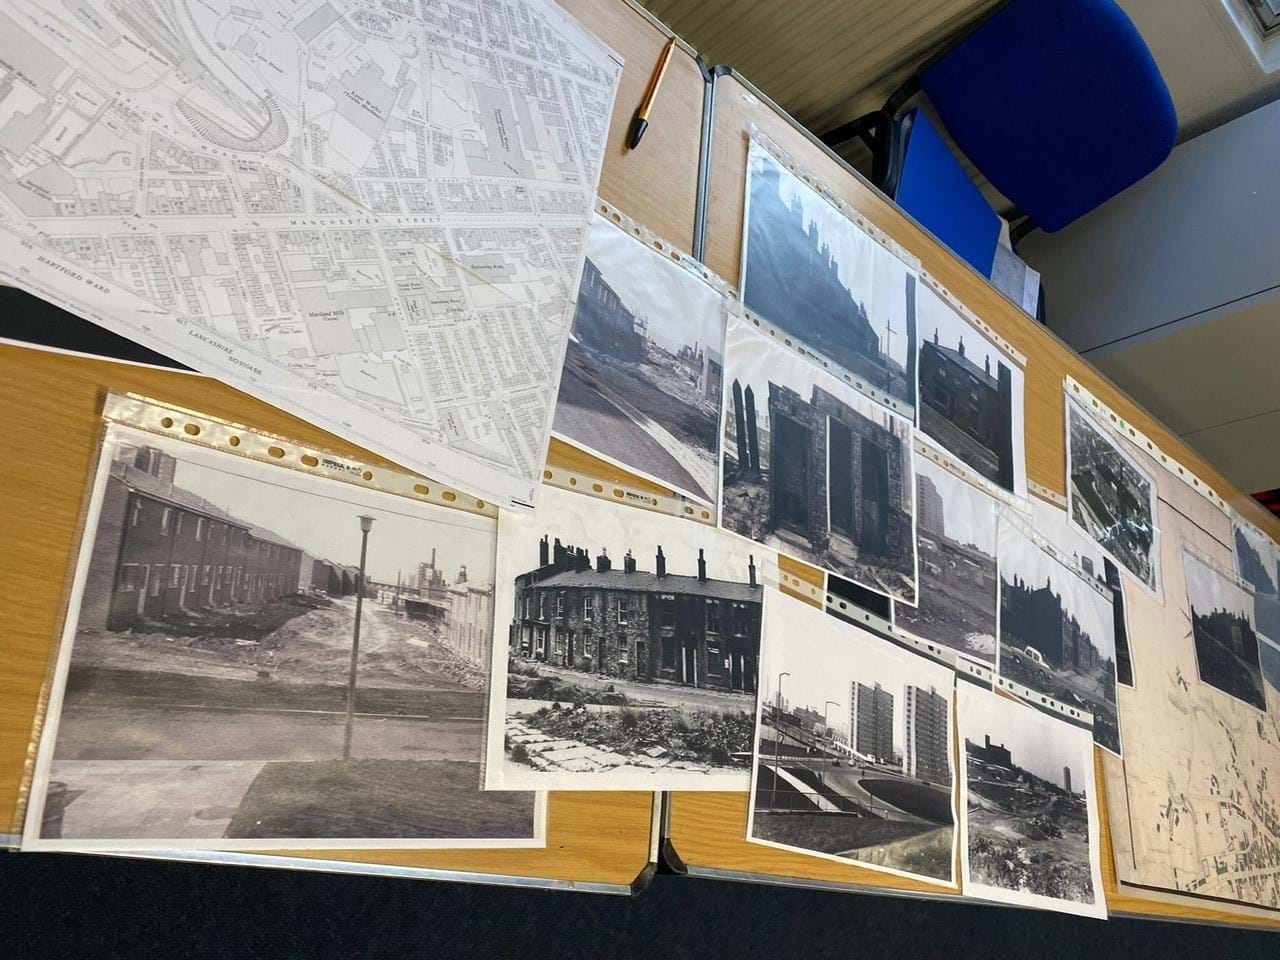 Fascinating photos showing the changing face of the neighbourhood around Crossbank and Summervale.